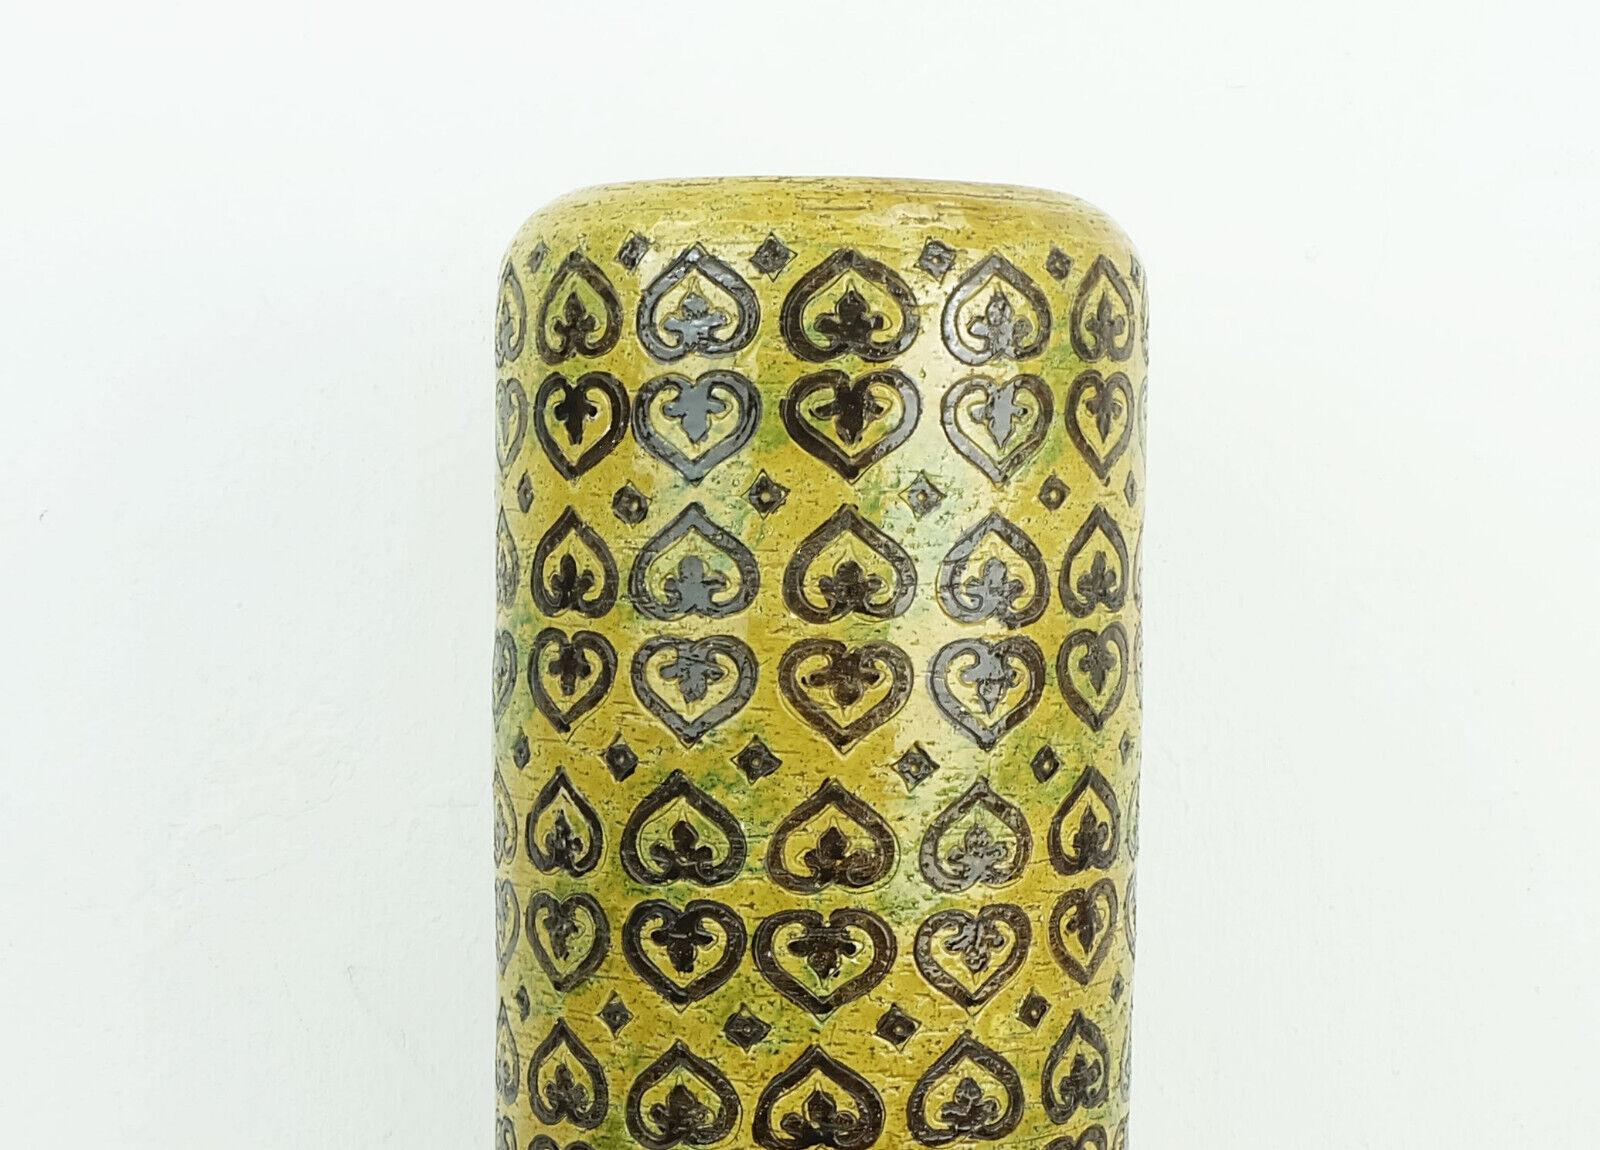 Bitossi vase in a very rare XL size. Aldo Londi for Bitossi Ceramiche, Firenze, Italy from the 60s. Decor Moresco. Glaze in ocher and dark yellow with some green, abstract relief pattern in brown. Marked on the bottom M 3/45 Italy.

Dimensions in